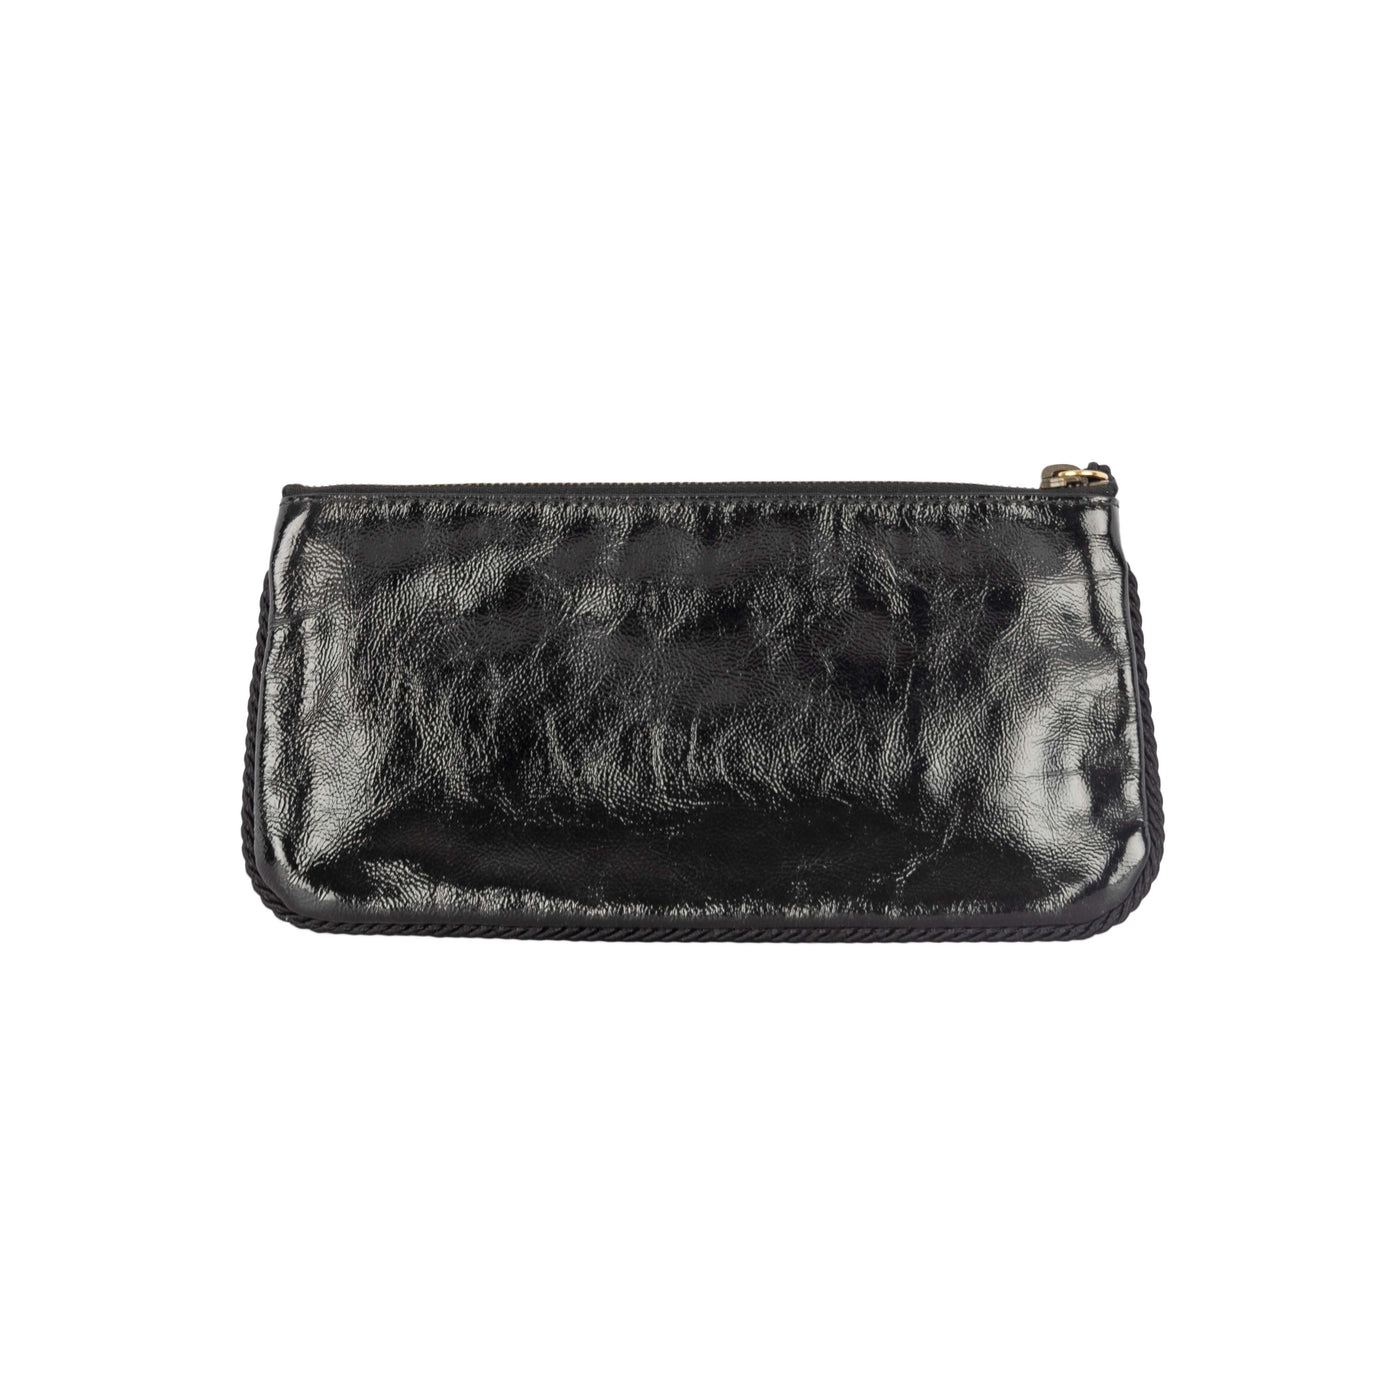 Secondhand Gucci Shiny Leather Clutch with Braided Trim & Tassel